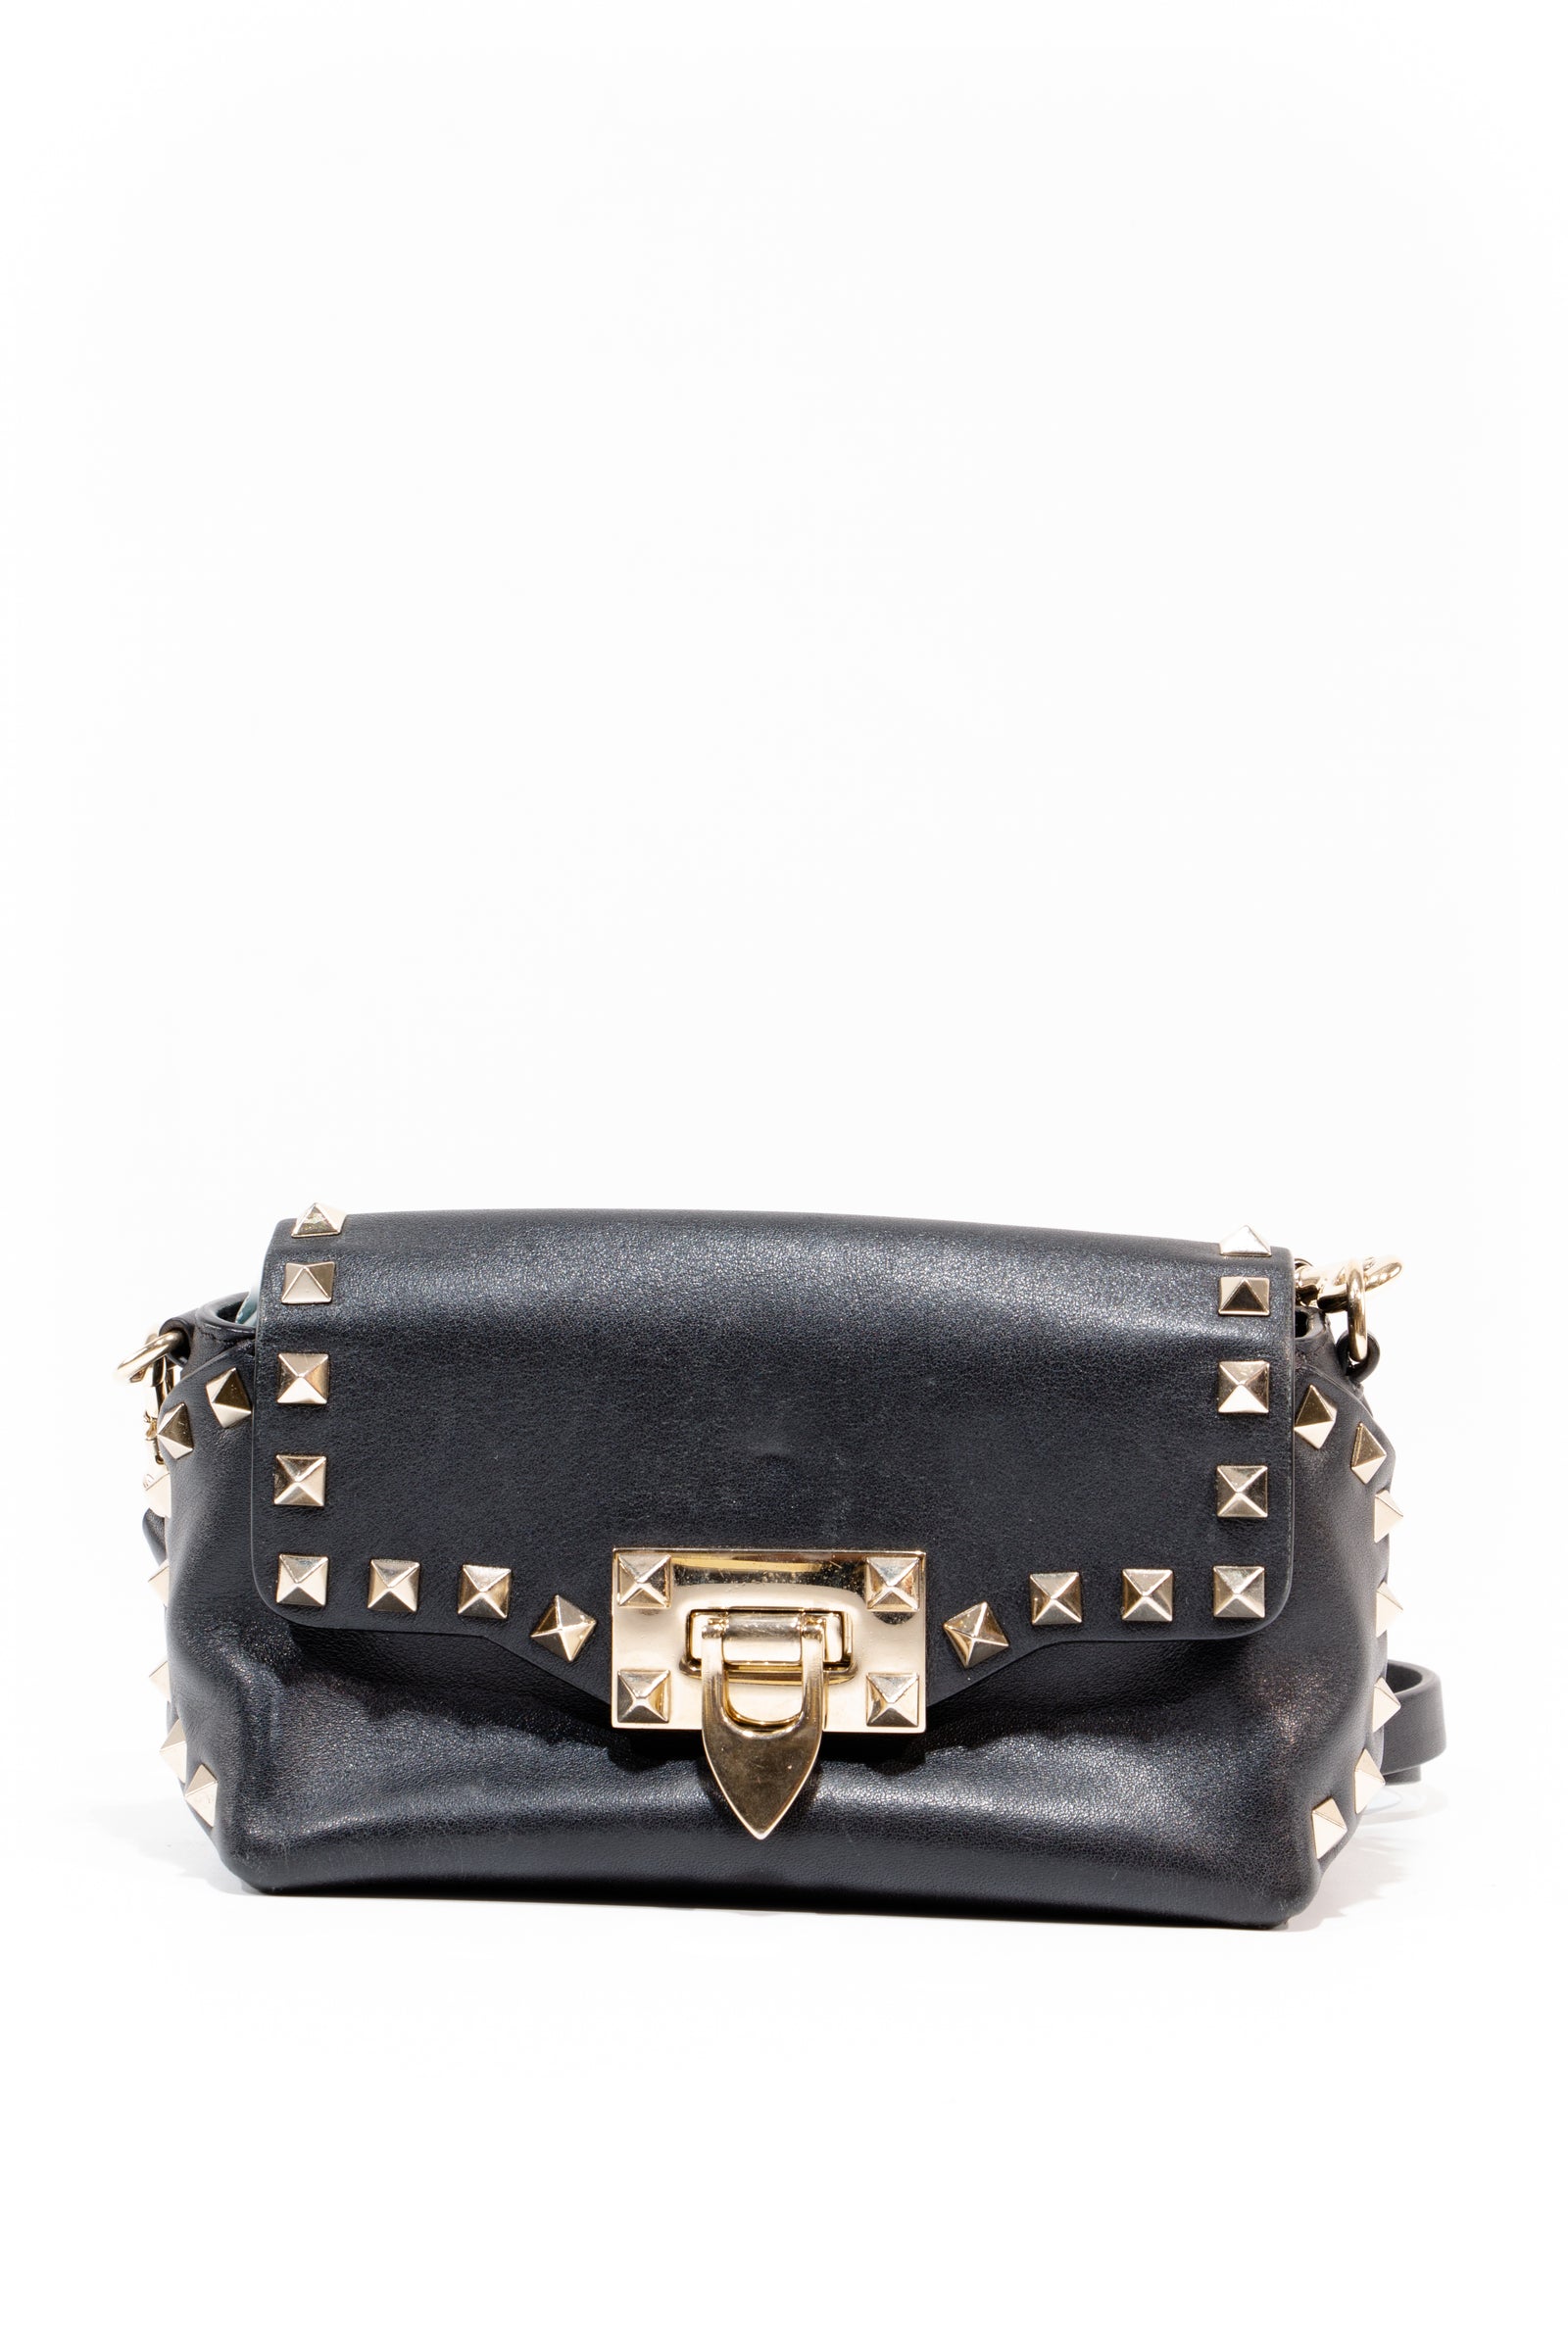 Valentino Neutrals Leather Rockstud Zip Pouch w/ Tags